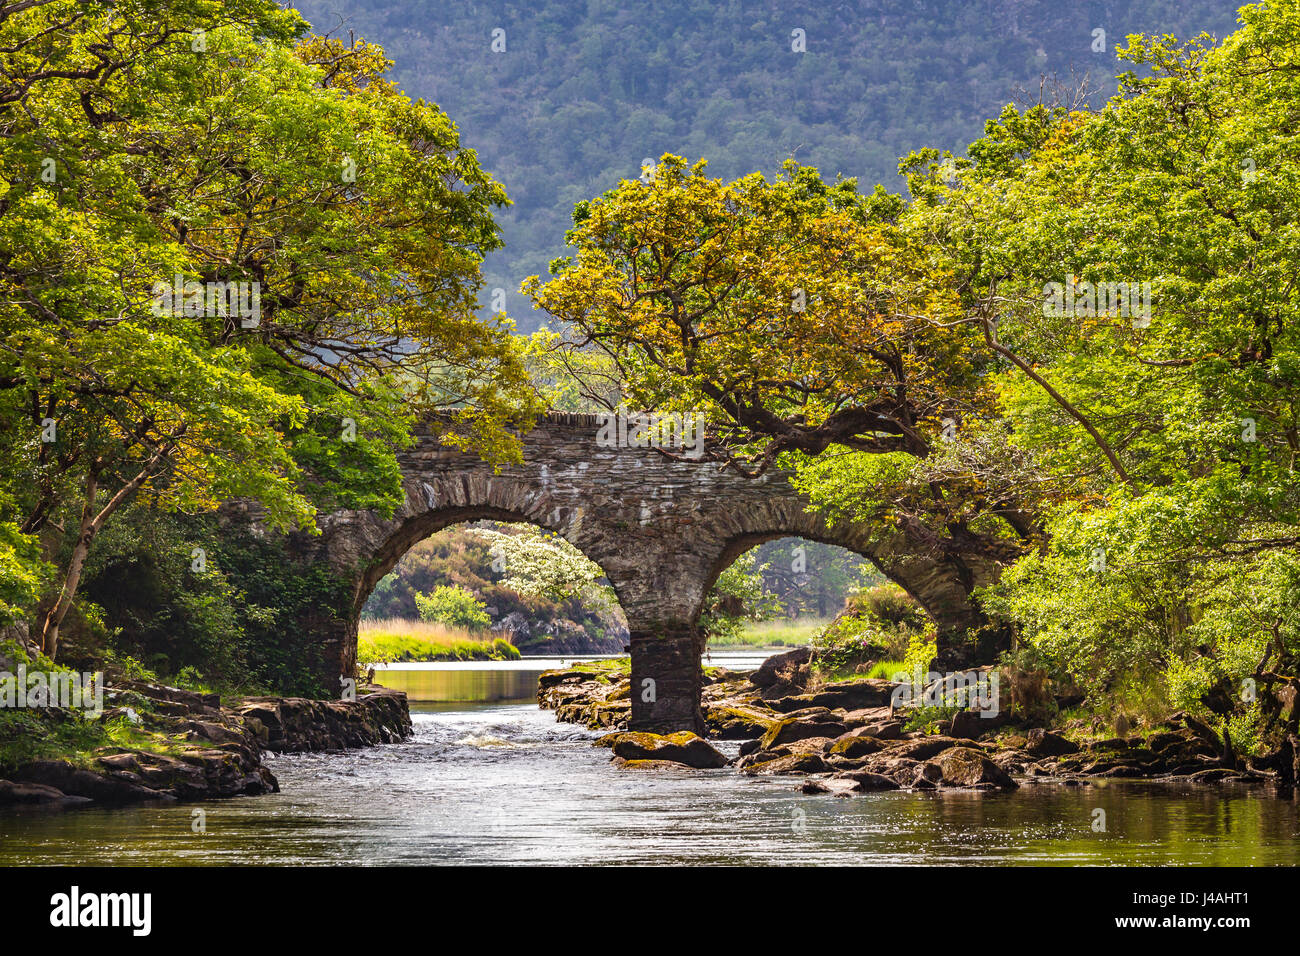 Old Weir Bridge at Meeting of the Waters, Killarney National Park, County Kerry, Ireland Stock Photo